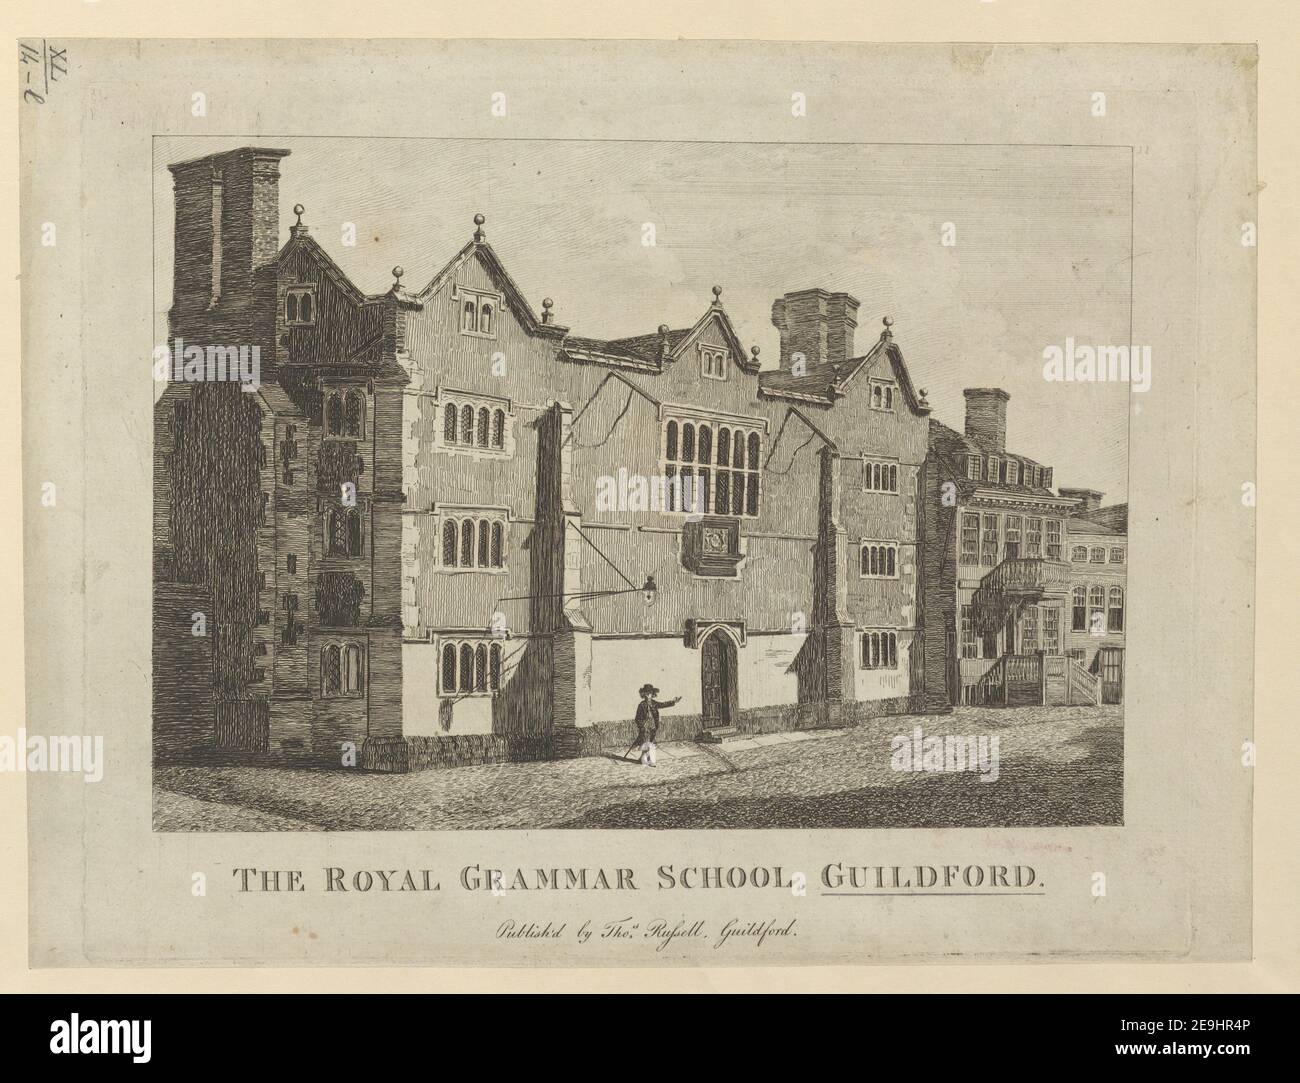 THE ROYAL GRAMMAR SCHOOL, GUILDFORD. Visual Material information:  Title: THE ROYAL GRAMMAR SCHOOL, GUILDFORD. 40.14.l. Place of publication: [Guildford] Publisher: Publish'd by Tho.s Russell, Guildford., Date of publication: [1780-1790 c.]  Item type: 1 print Medium: etching Dimensions: platemark 23.7 x 29.8 cm  Former owner: George III, King of Great Britain, 1738-1820 Stock Photo